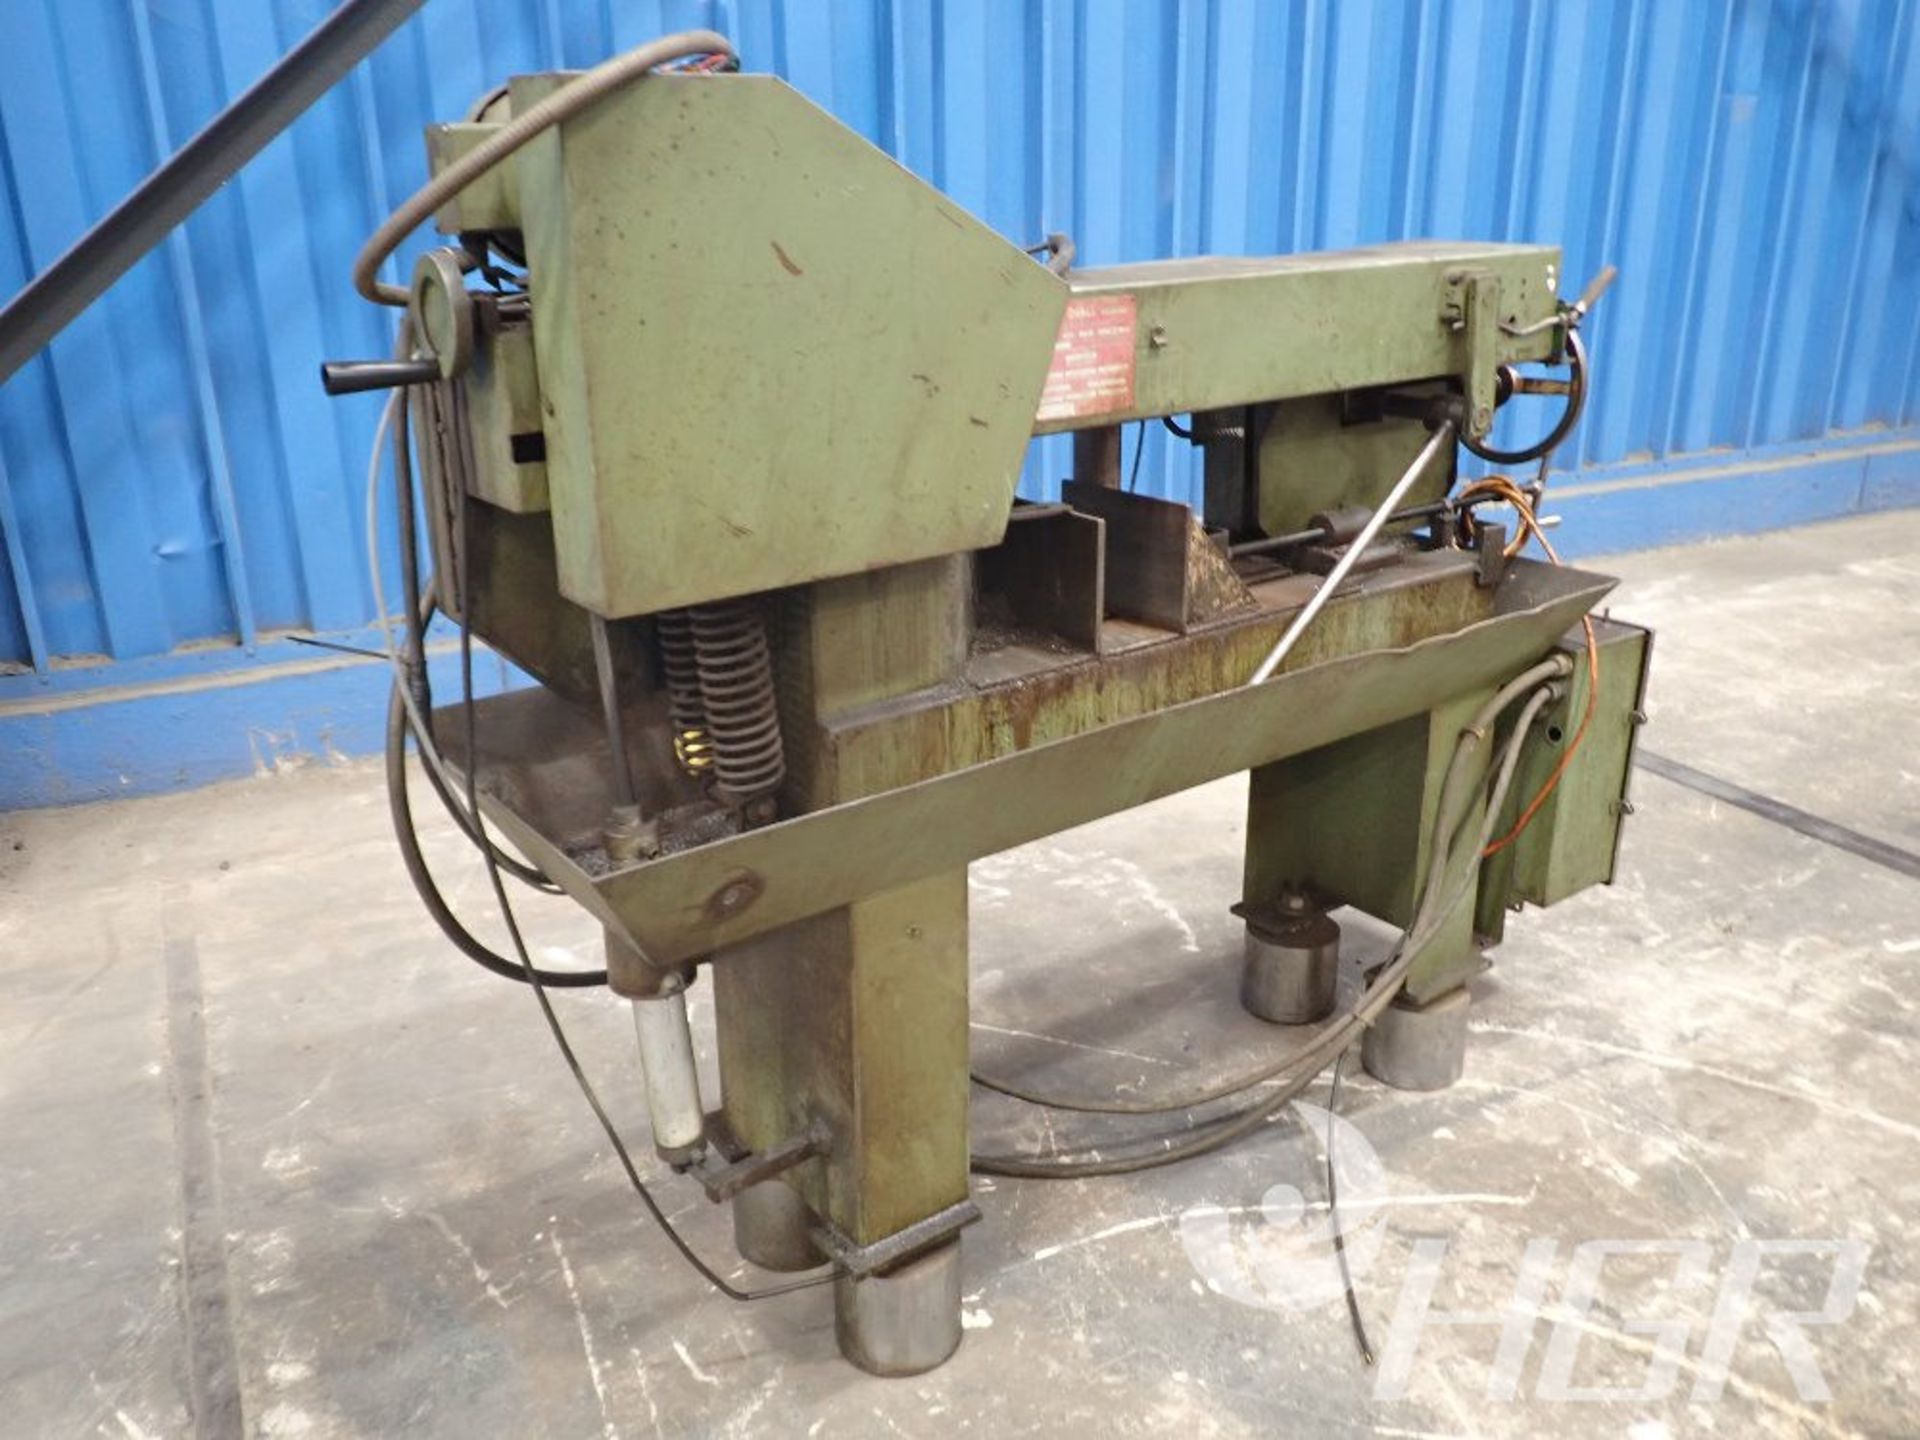 DO ALL HORIZONTAL BANDSAW, Model C-4, Date: n/a; s/n 234-773309, Approx. Capacity: 18", Power: 3/